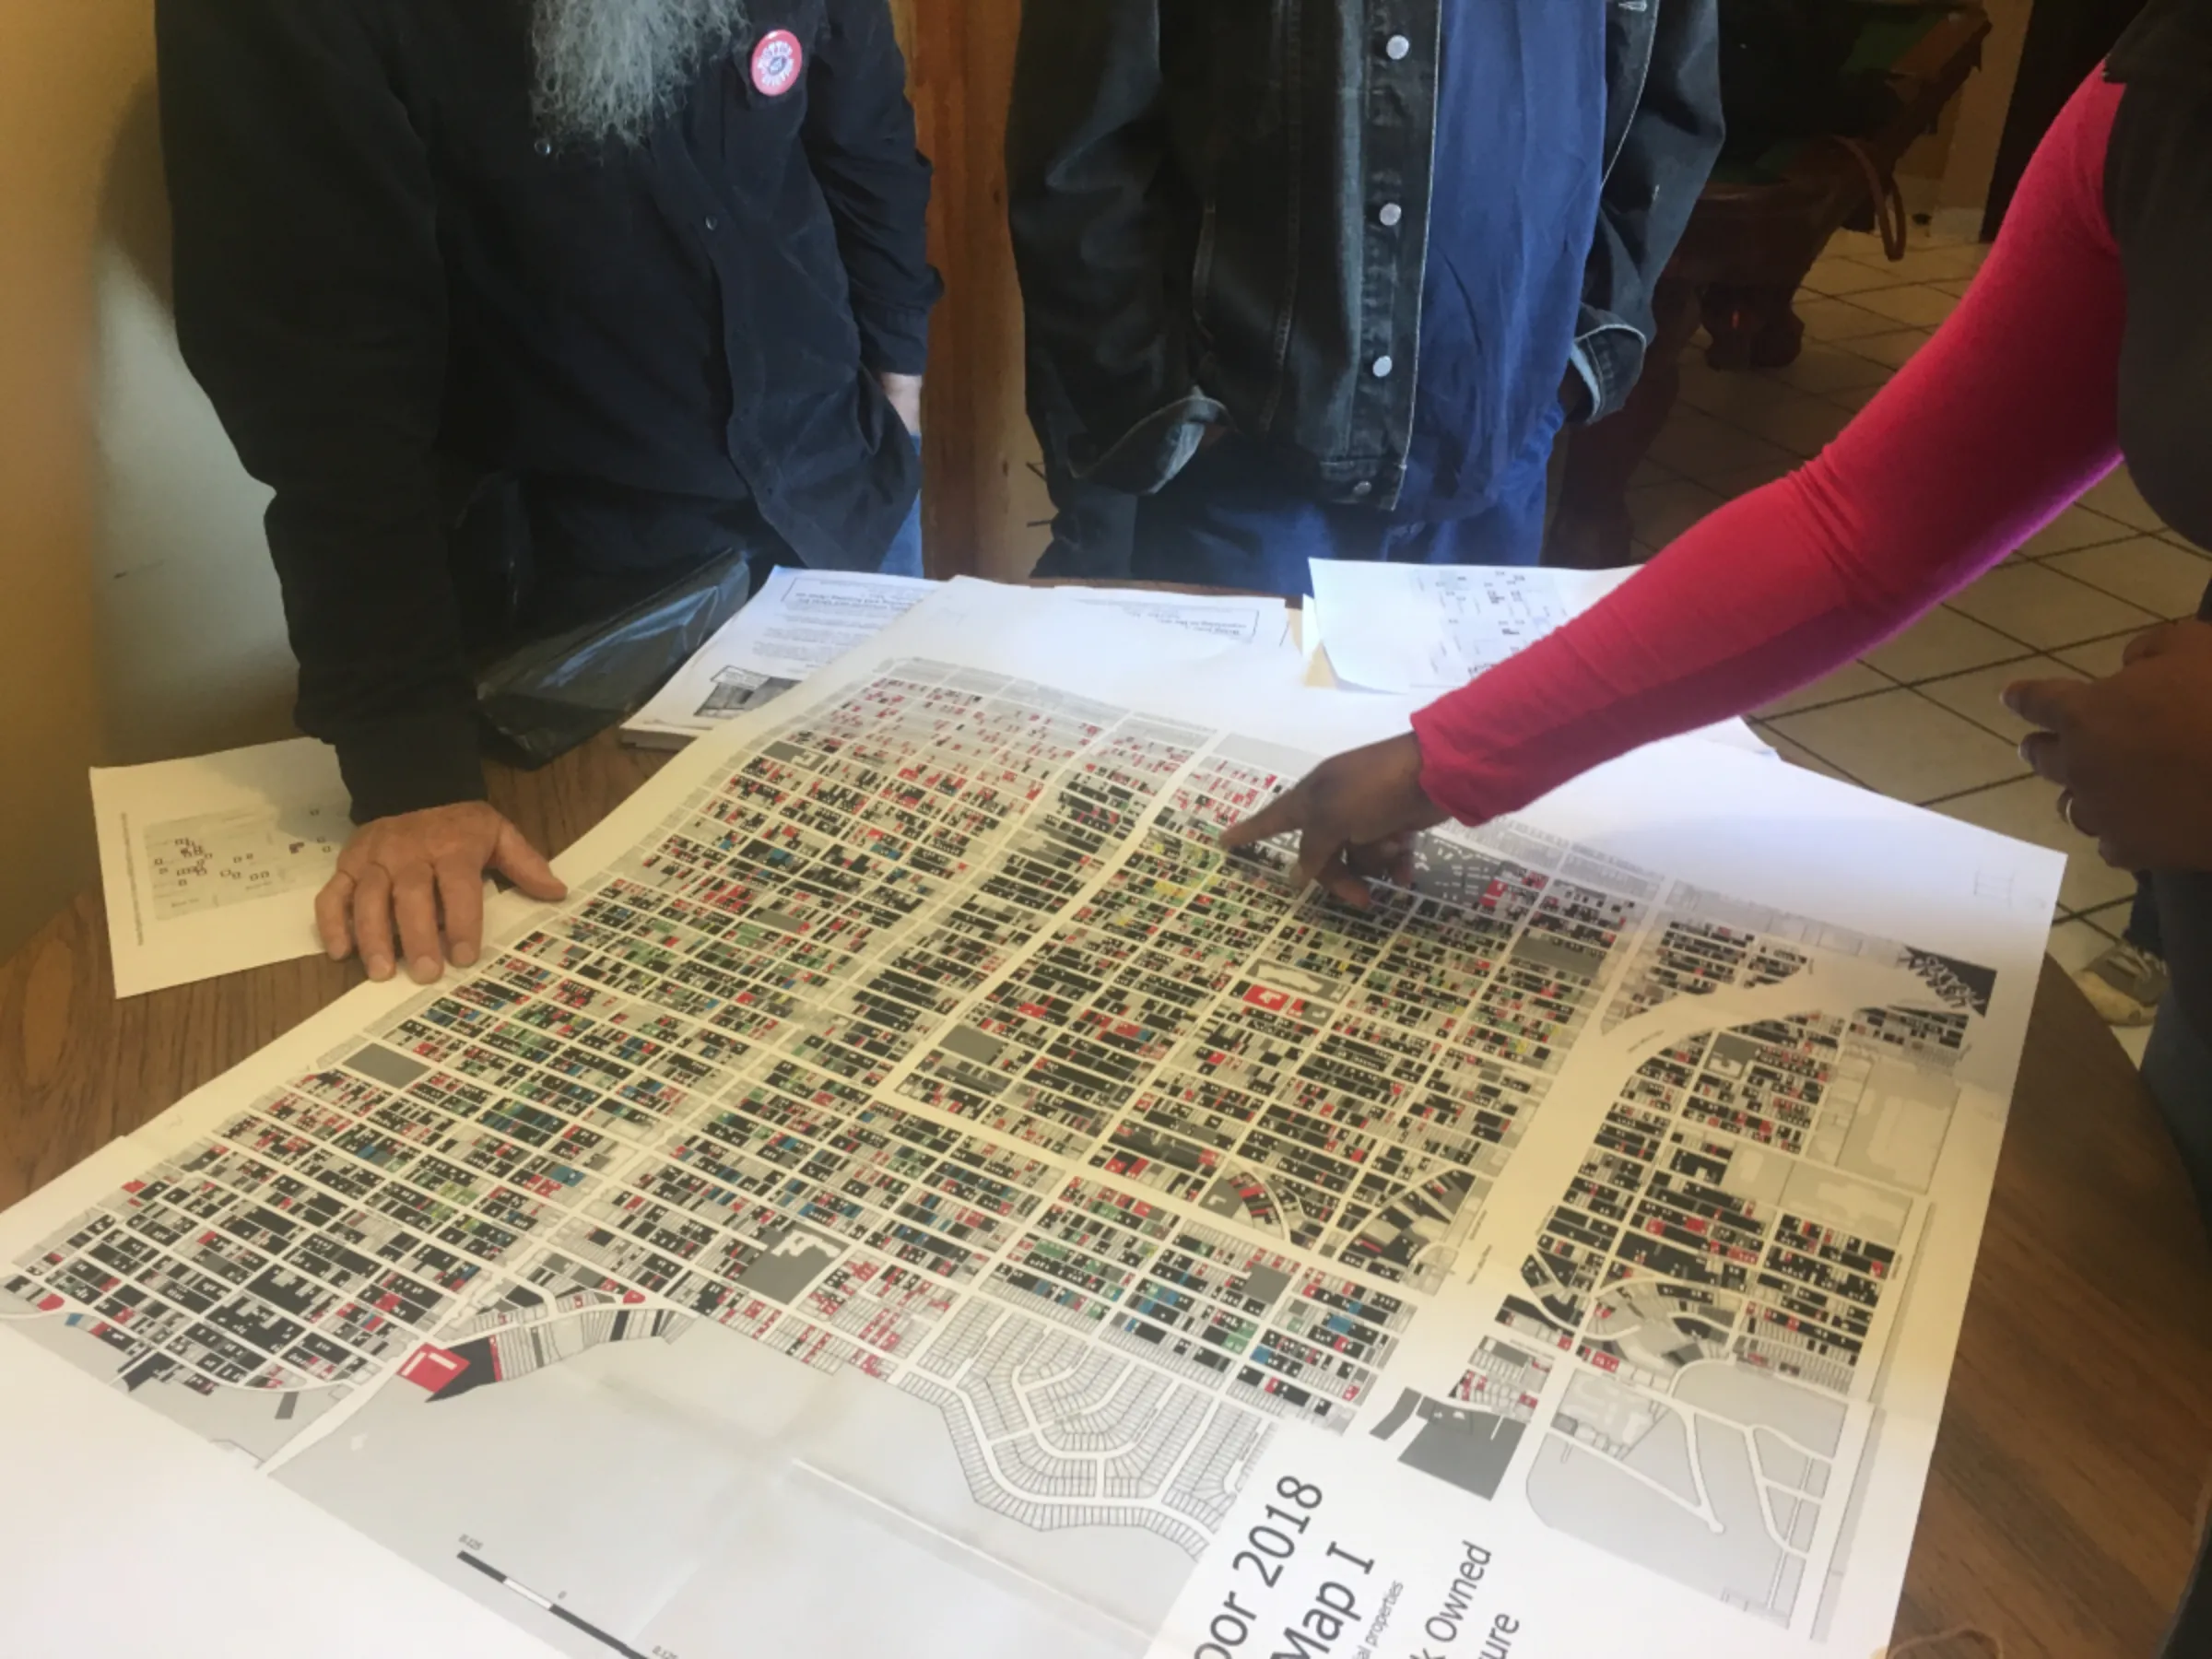 Local residents and organizers look at a property ownership map in Detroit in 2019. Property Praxis/Handout via Thomson Reuters Foundation